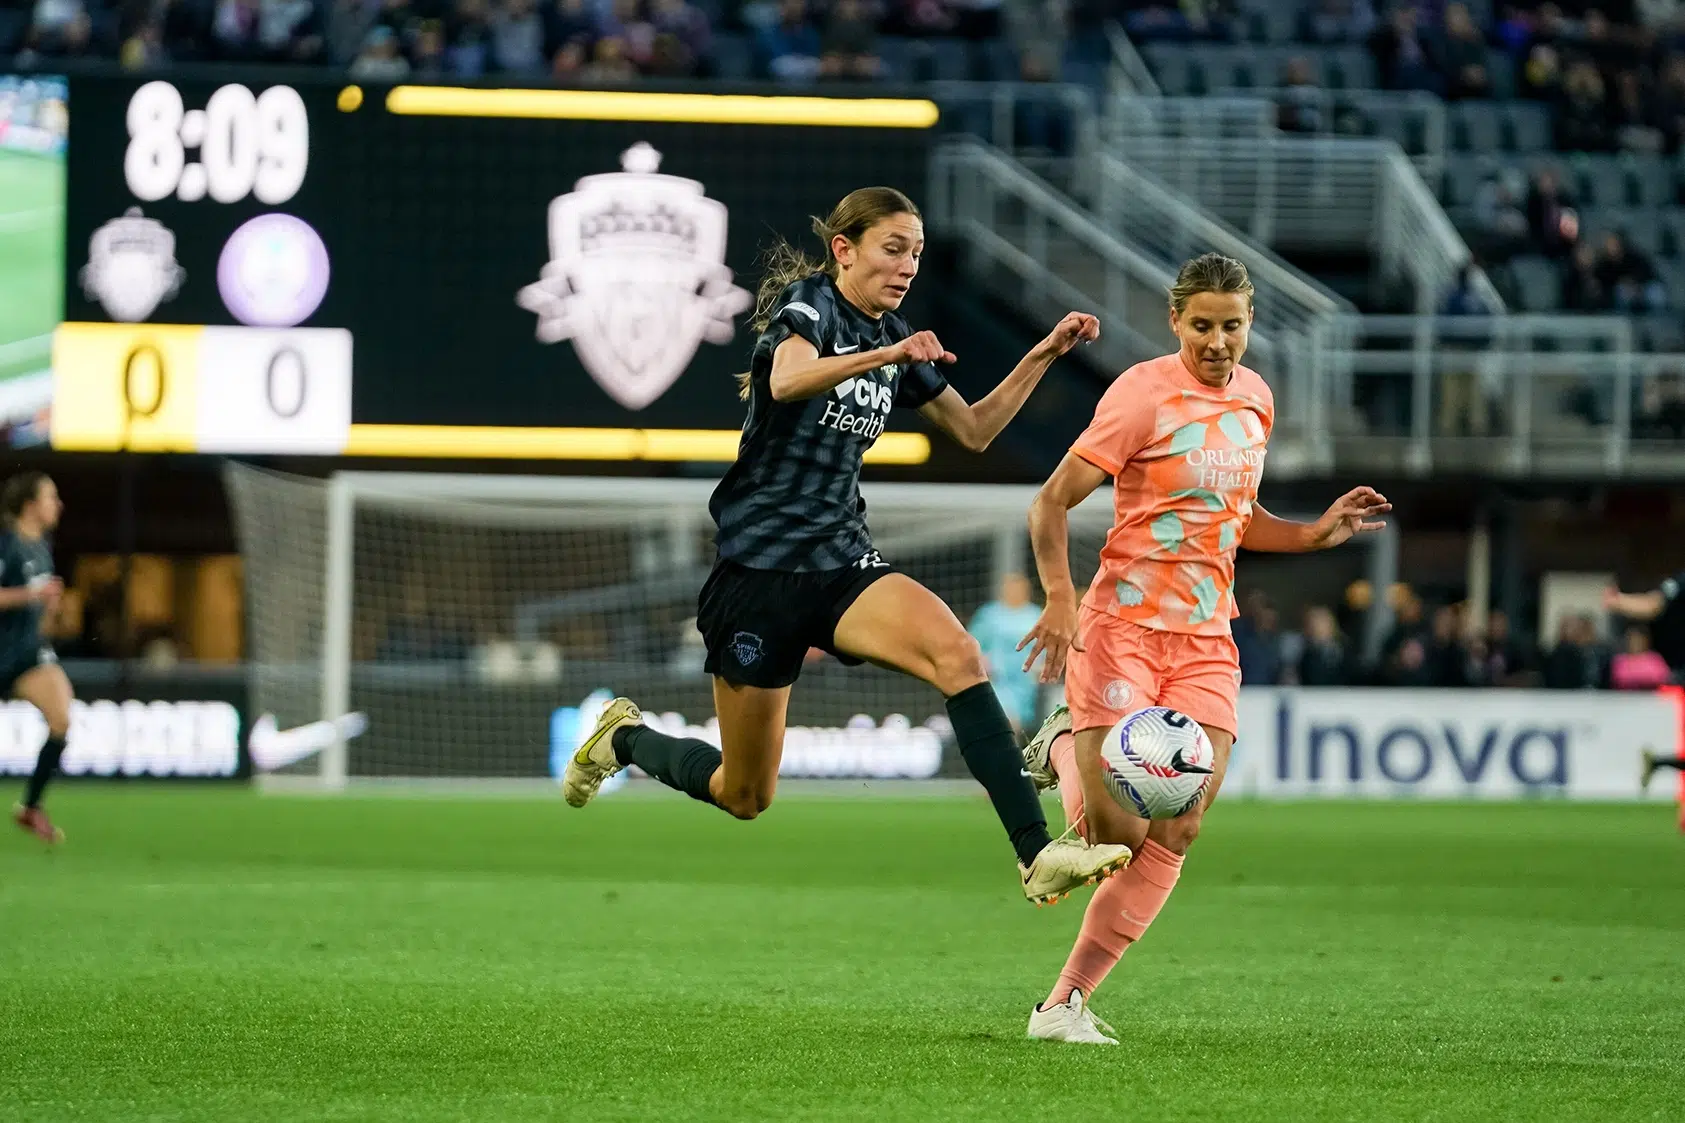 Paige Metayer controls a ball from the air while in a black kit. An Orlando defender in an orange kit closes in.